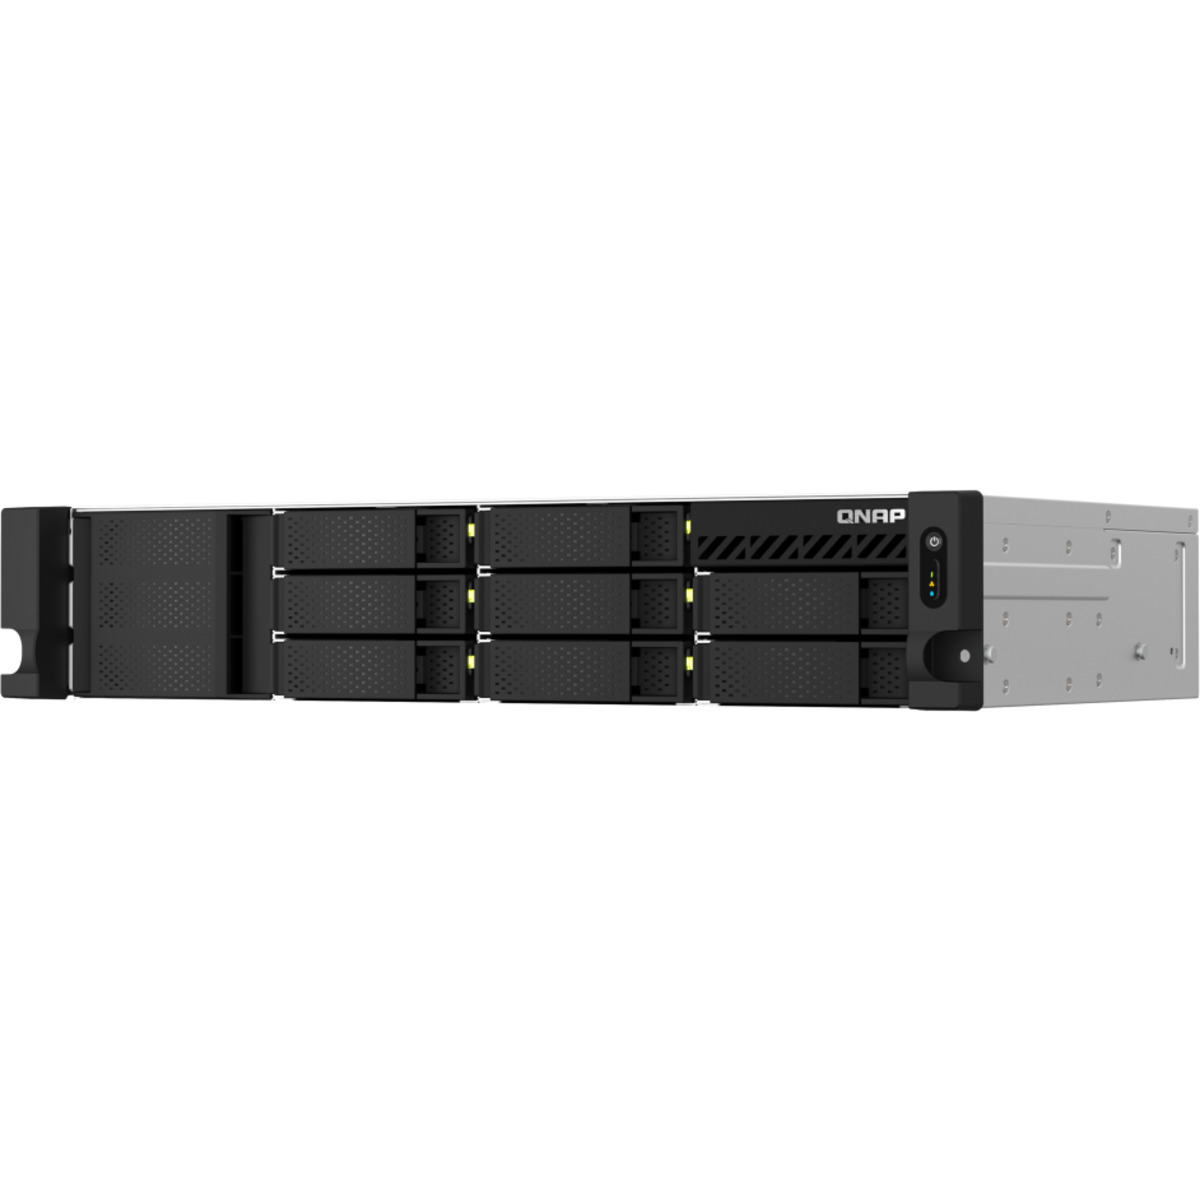 buy QNAP TS-864eU-RP 32tb RackMount NAS - Network Attached Storage Device 8x4000gb Seagate BarraCuda ST4000DM004 3.5 7200rpm SATA 6Gb/s HDD CONSUMER Class Drives Installed - Burn-In Tested - nas headquarters buy network attached storage server device das new raid-5 free shipping usa spring sale TS-864eU-RP